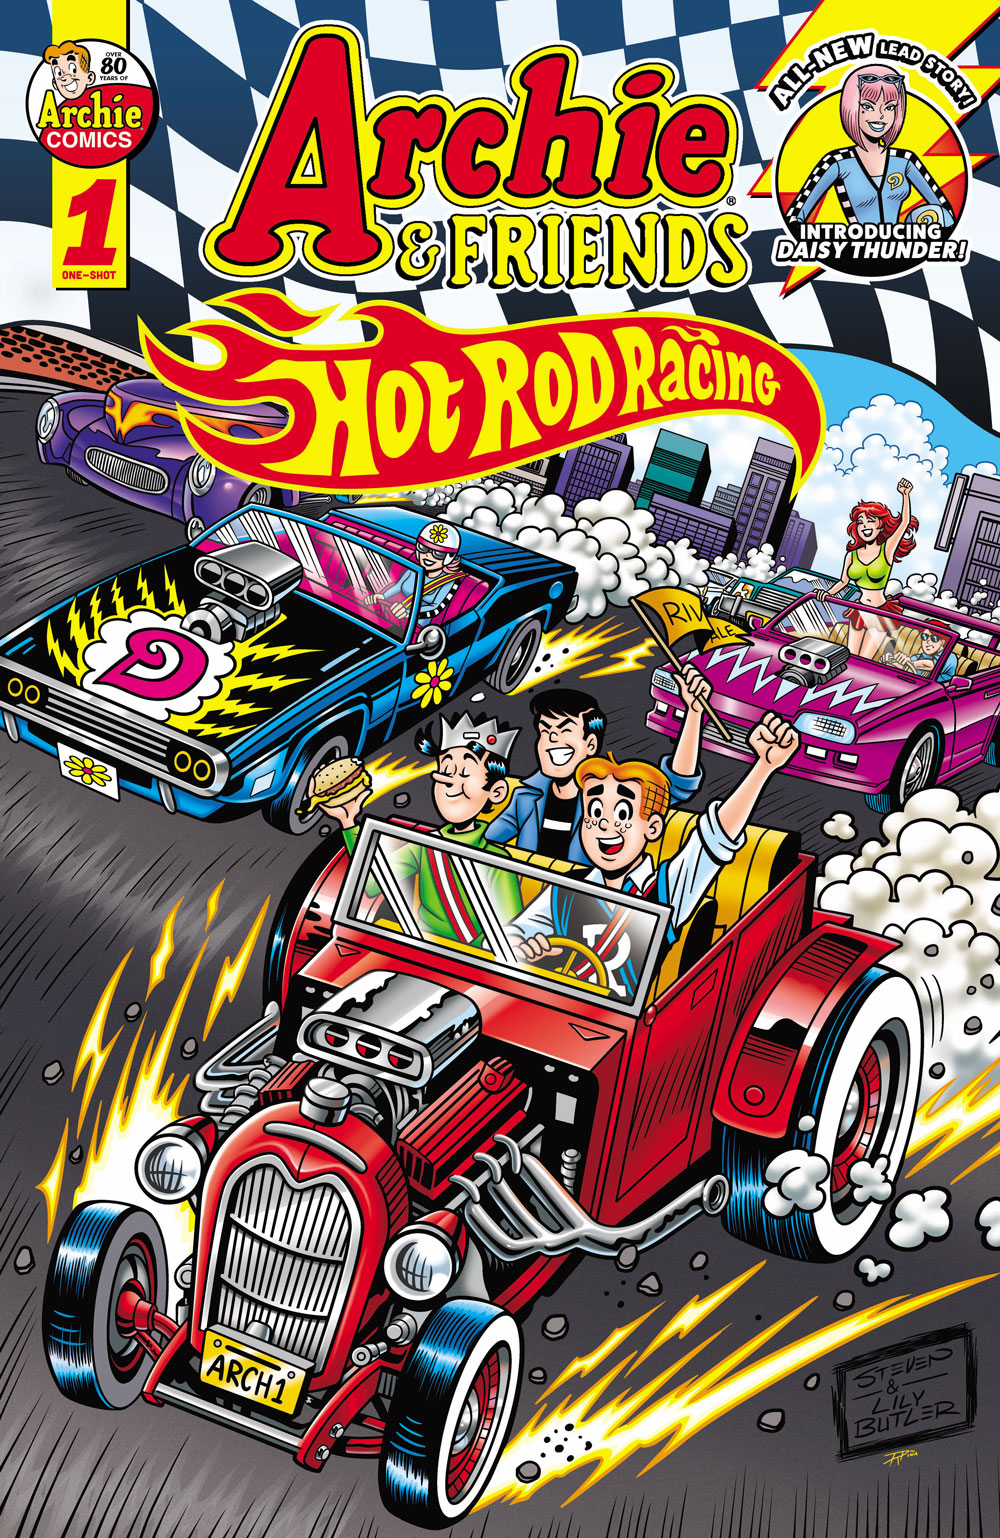 Archie, Reggie and Jughead lead a drag race in Archie's customized jalopy, with new character Daisy Thunder following a close second. She is a slim white woman with pink hair wearing a helmet and a blue jumpsuit. Cheryl and Jason Blossom follow in third place.